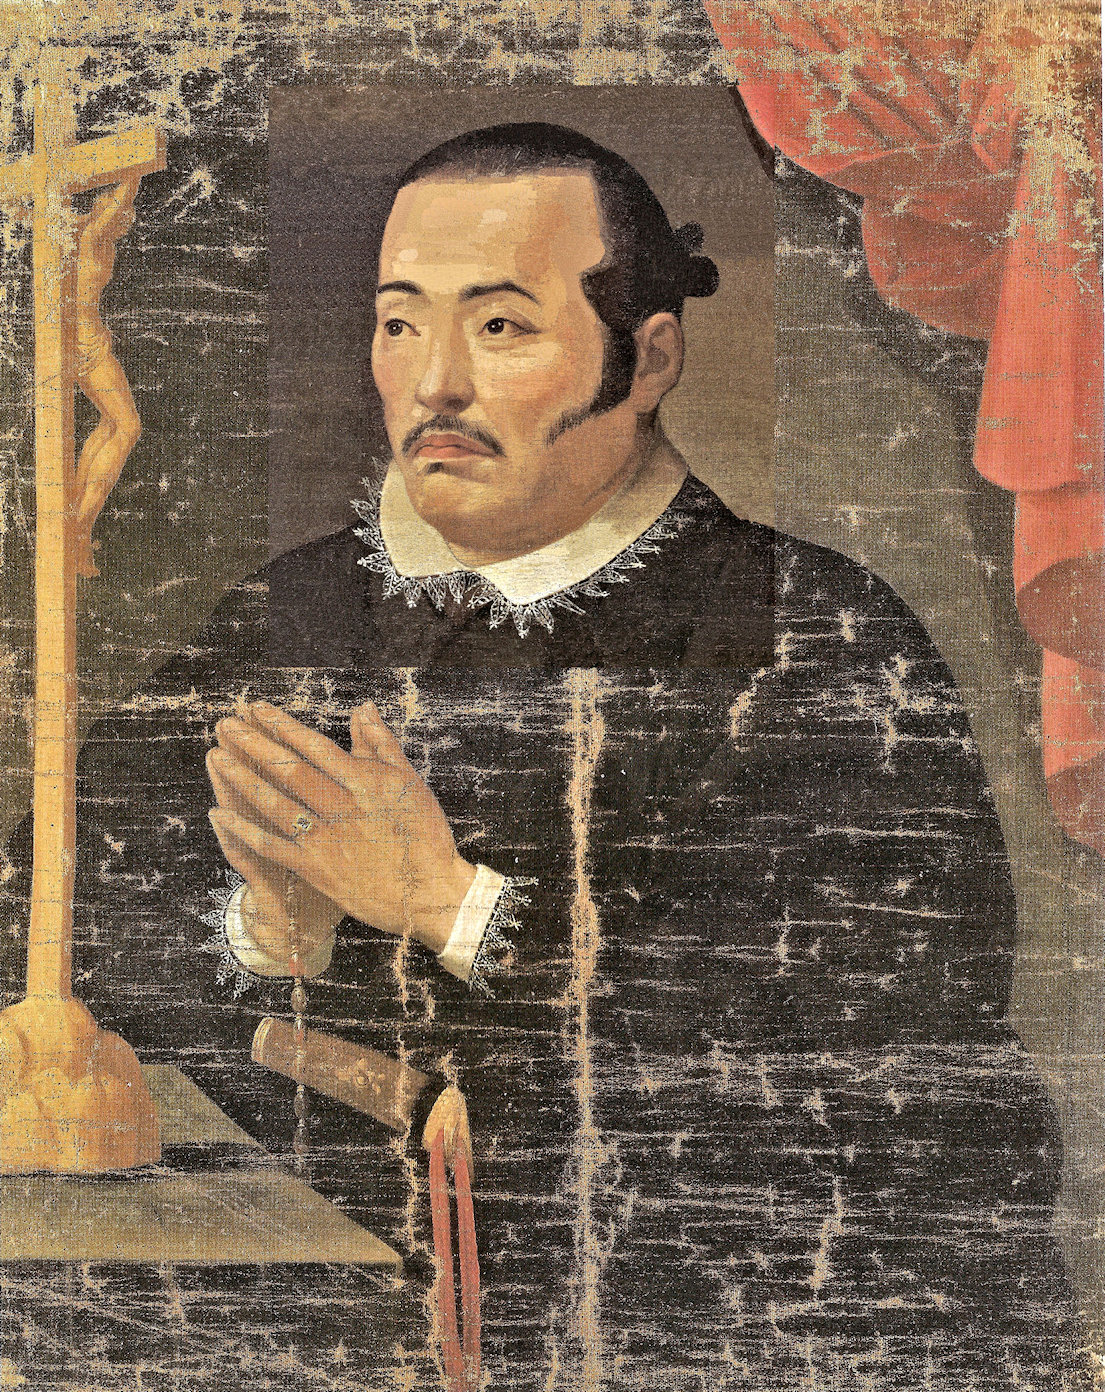 Tsunenaga Rokuyemon Hasekura in Prayer, painted in Madrid in 1610s. His lord, Masamune Date of Sendai Clan, appointed Tsunenaga to lead the so-called Keicho Embassy to Europe for negotiating direct trade with Spain. The journey started in1613 and took seven years both ways ended in vain, as the Shogunate government issued the edict to prohibit the visit of Spanish and Portuguese. (Image from: Pictorial Record of National Treasure: Material related to the Keicho Mission to Europe, Sendai City Museum 2003. Defects around the face manually fixed on Corel PhotoShop).